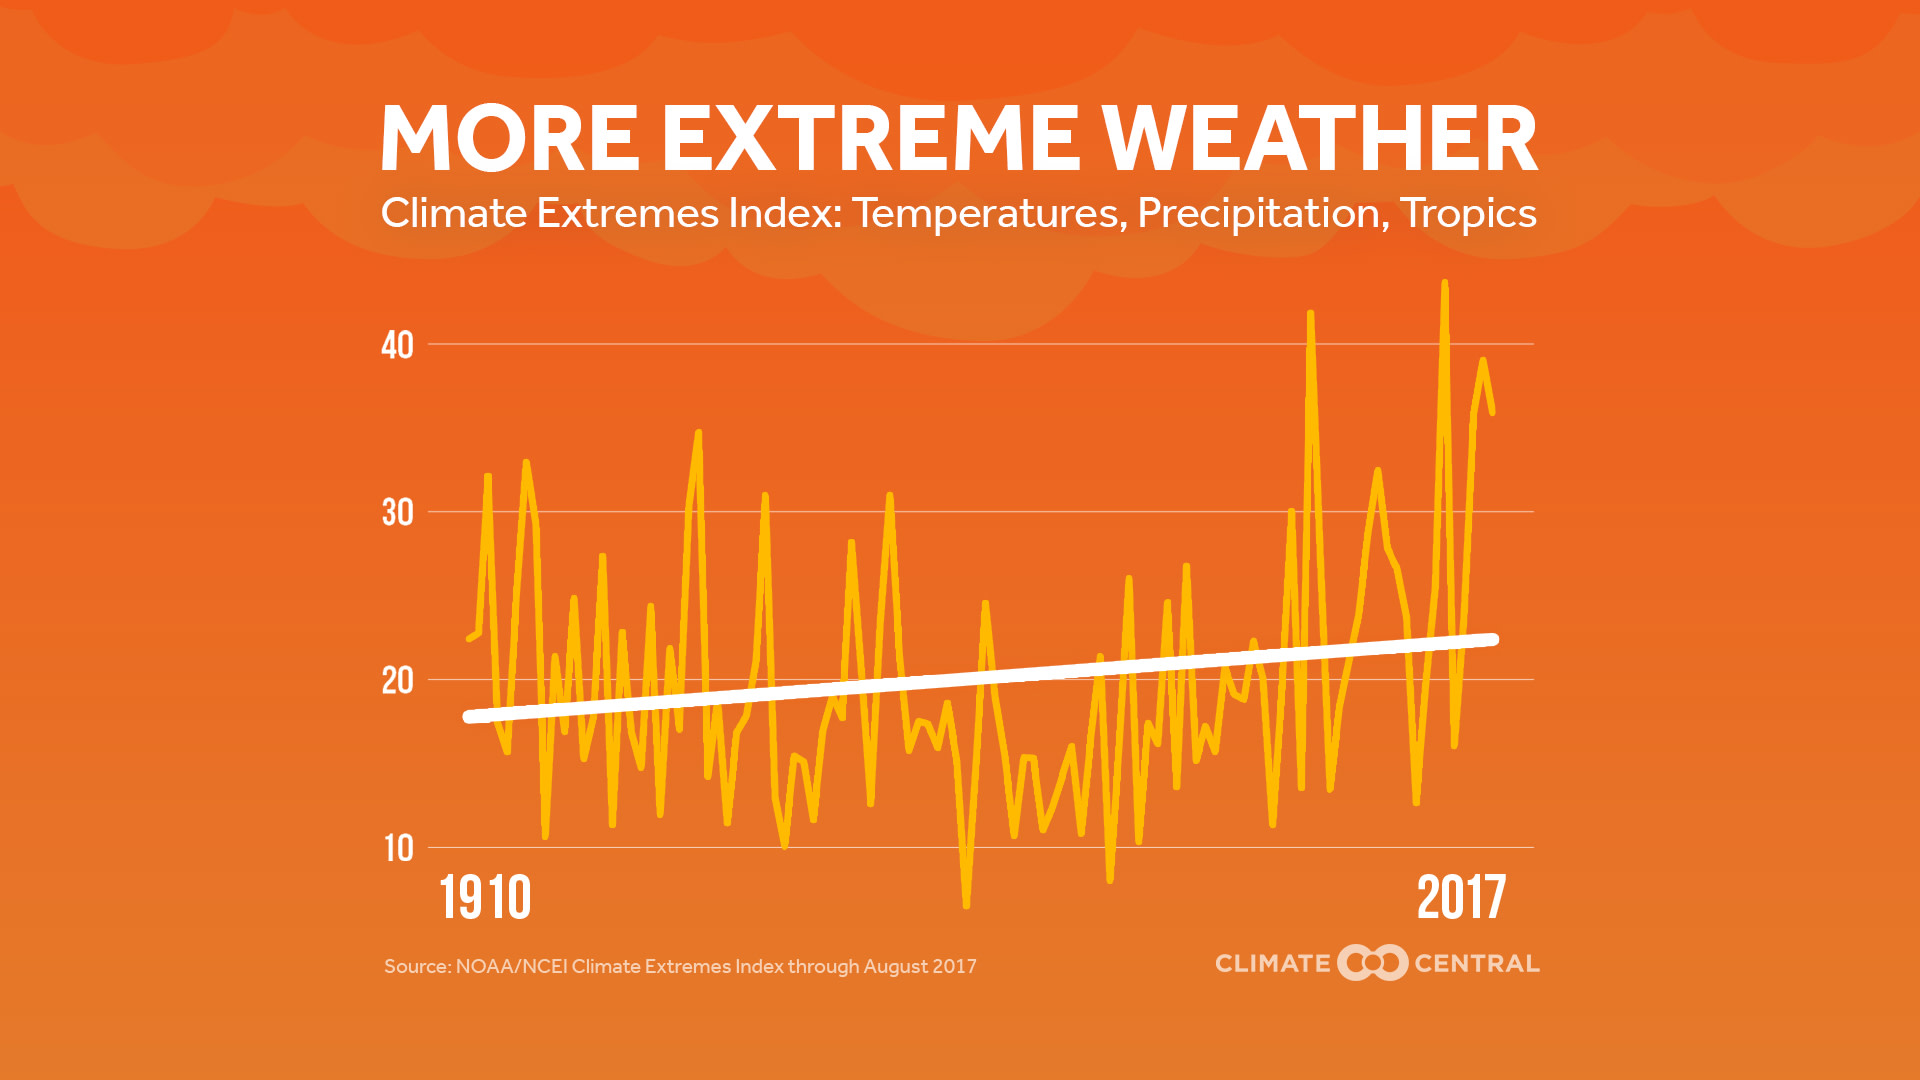 Set 1 - Increasing Climate Extremes